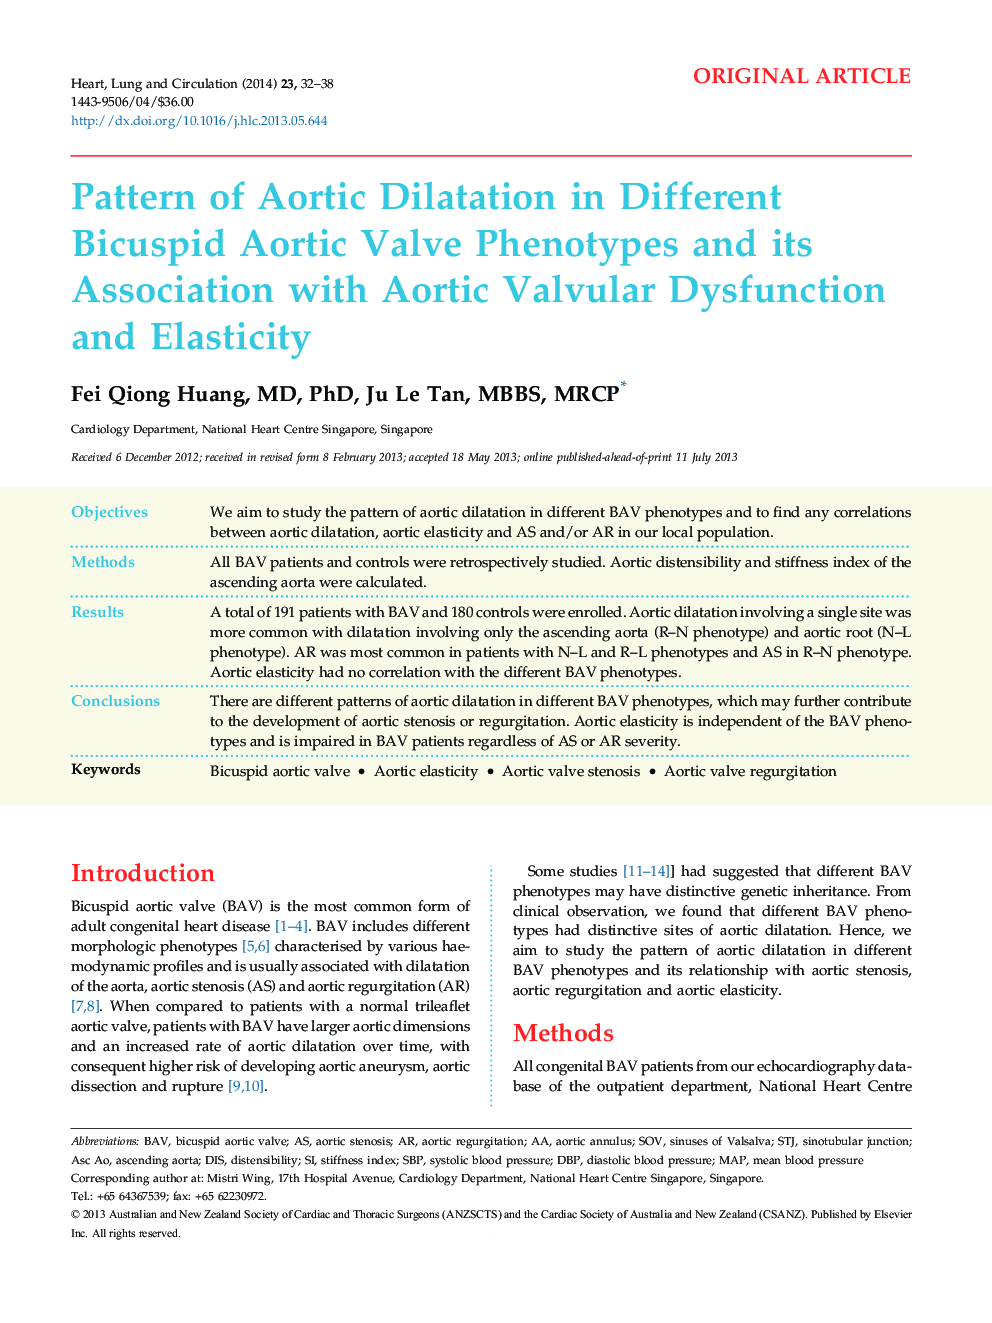 Pattern of Aortic Dilatation in Different Bicuspid Aortic Valve Phenotypes and its Association with Aortic Valvular Dysfunction and Elasticity